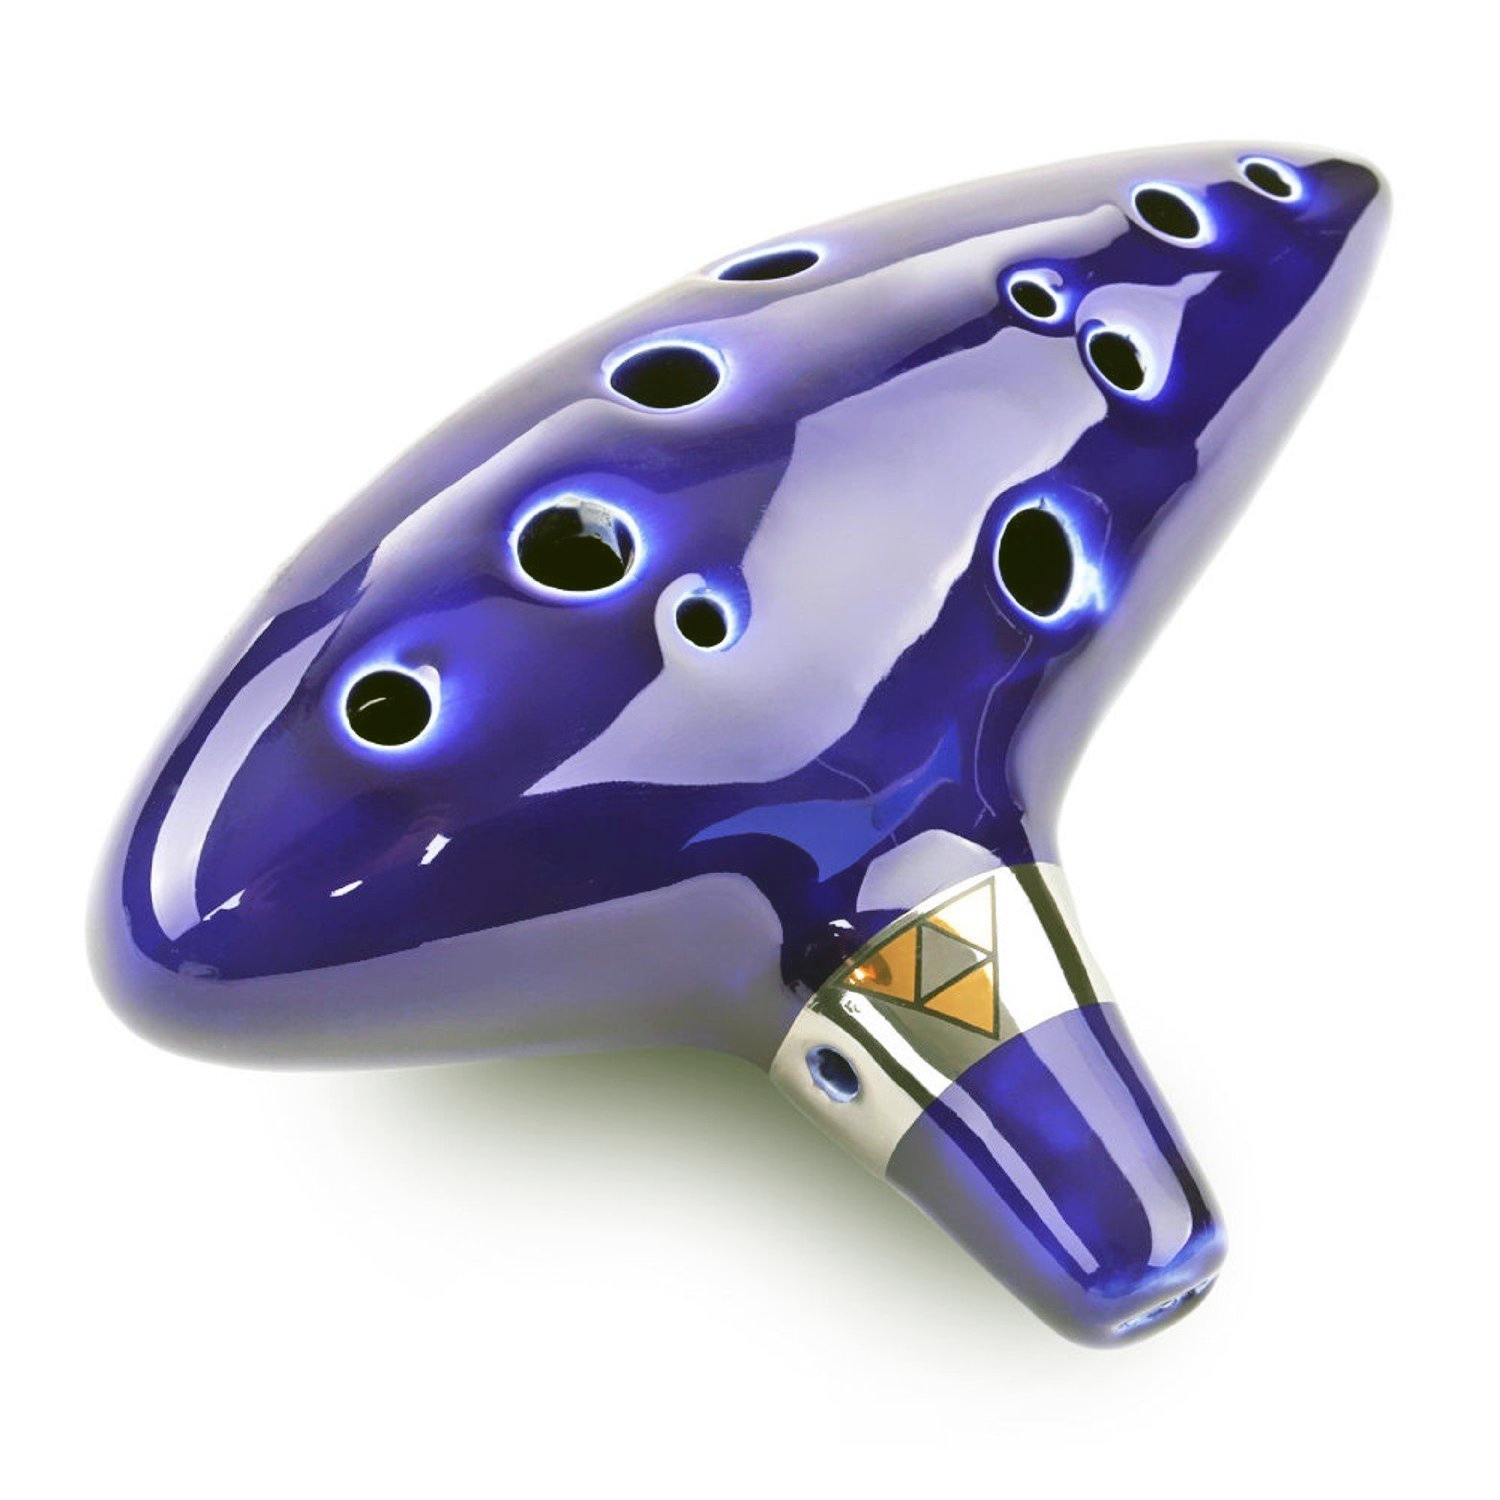 review-legend-of-zelda-12-hole-ocarina-of-time-musical-instrument-armchair-arcade